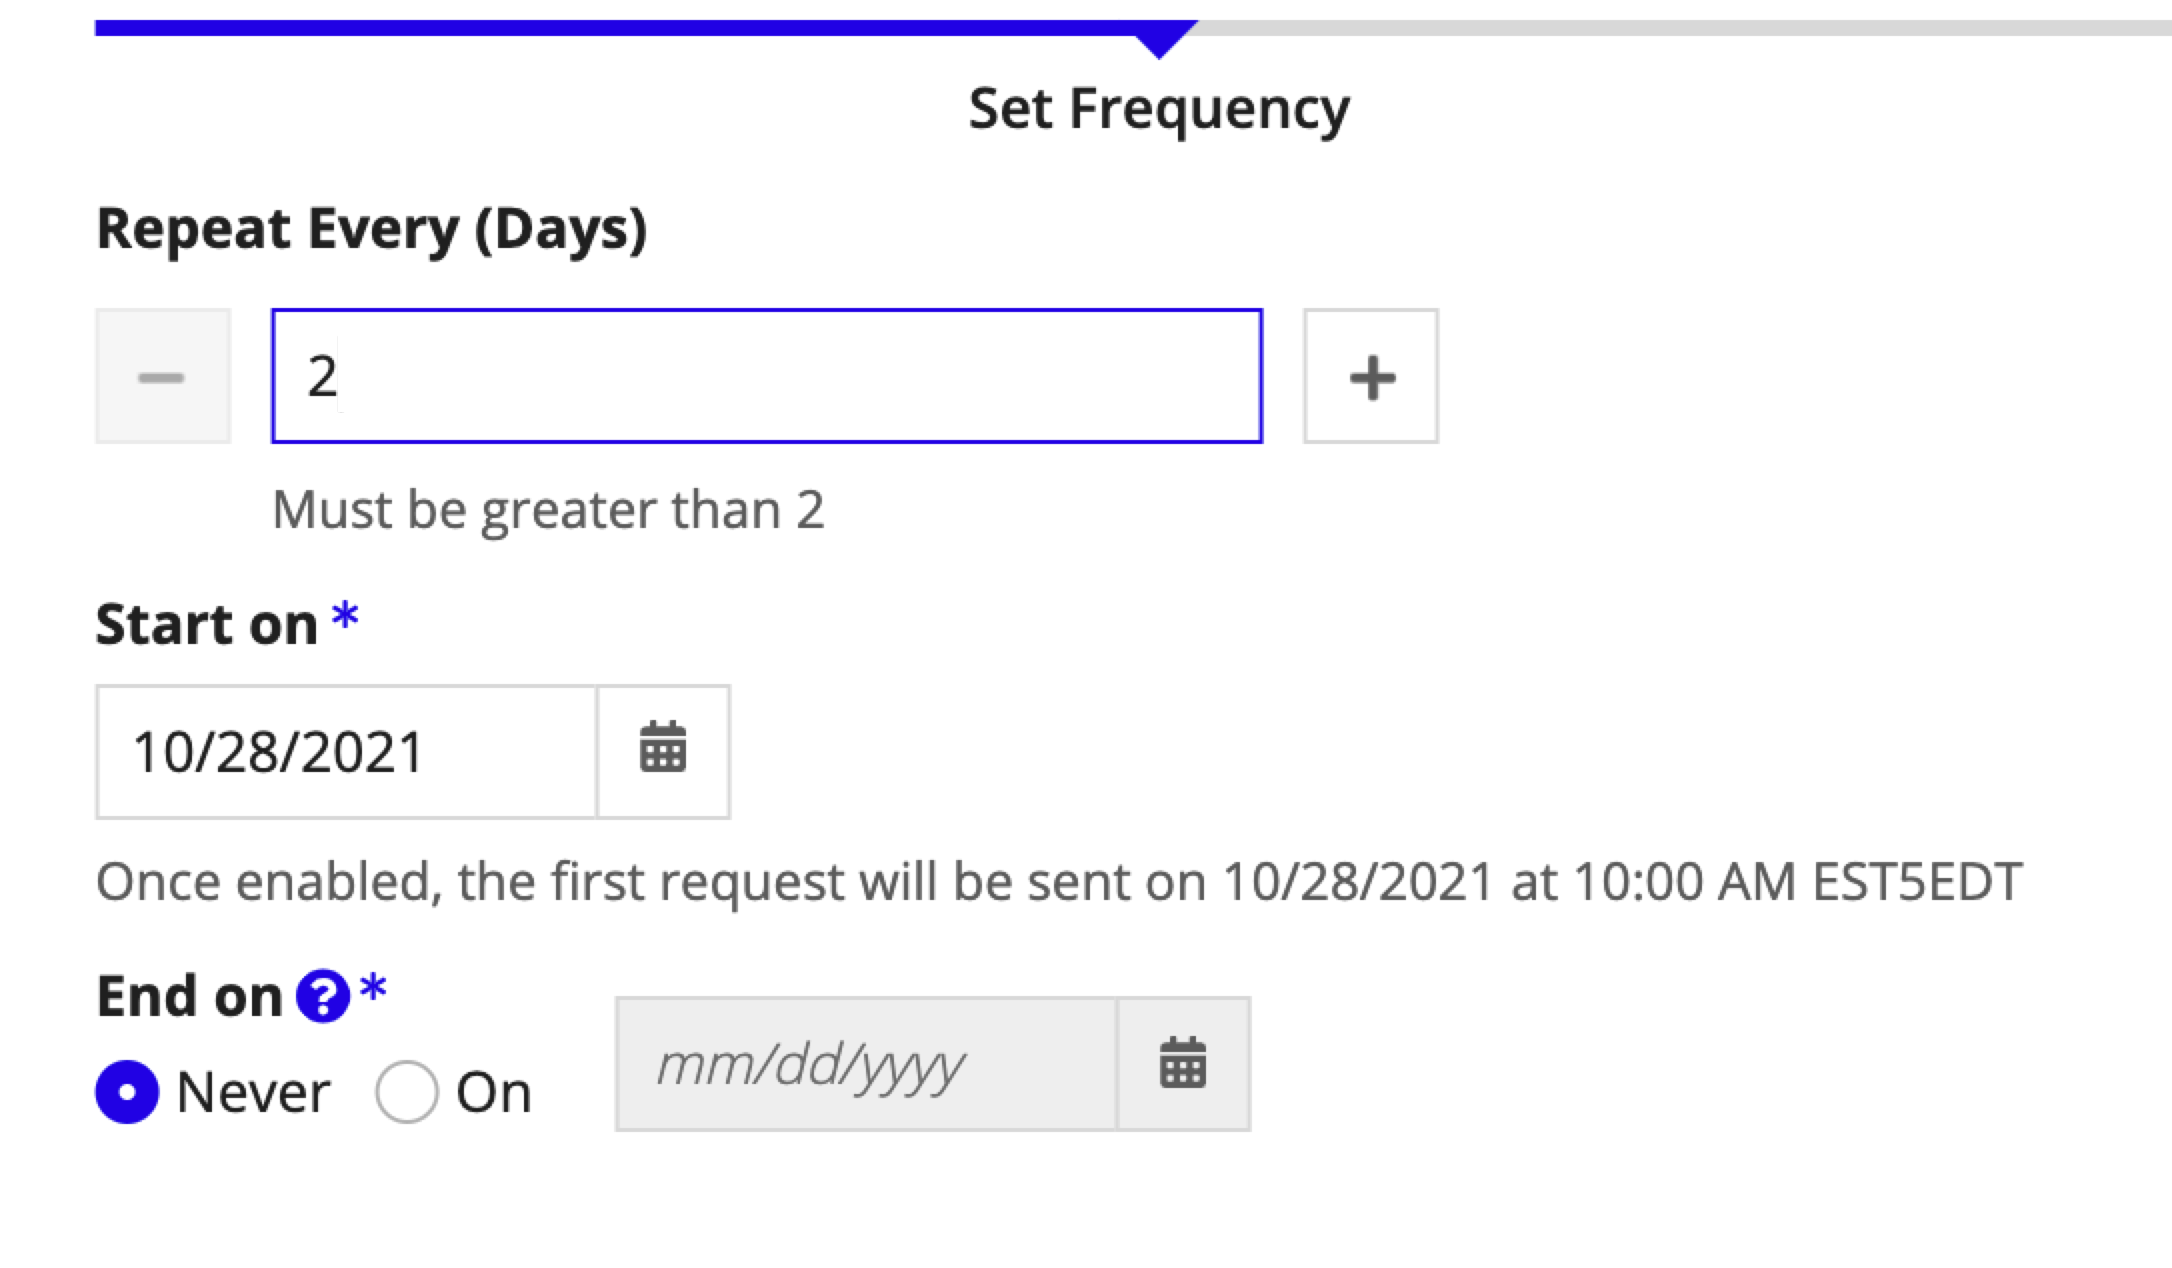 automated_test_request_schedule.png